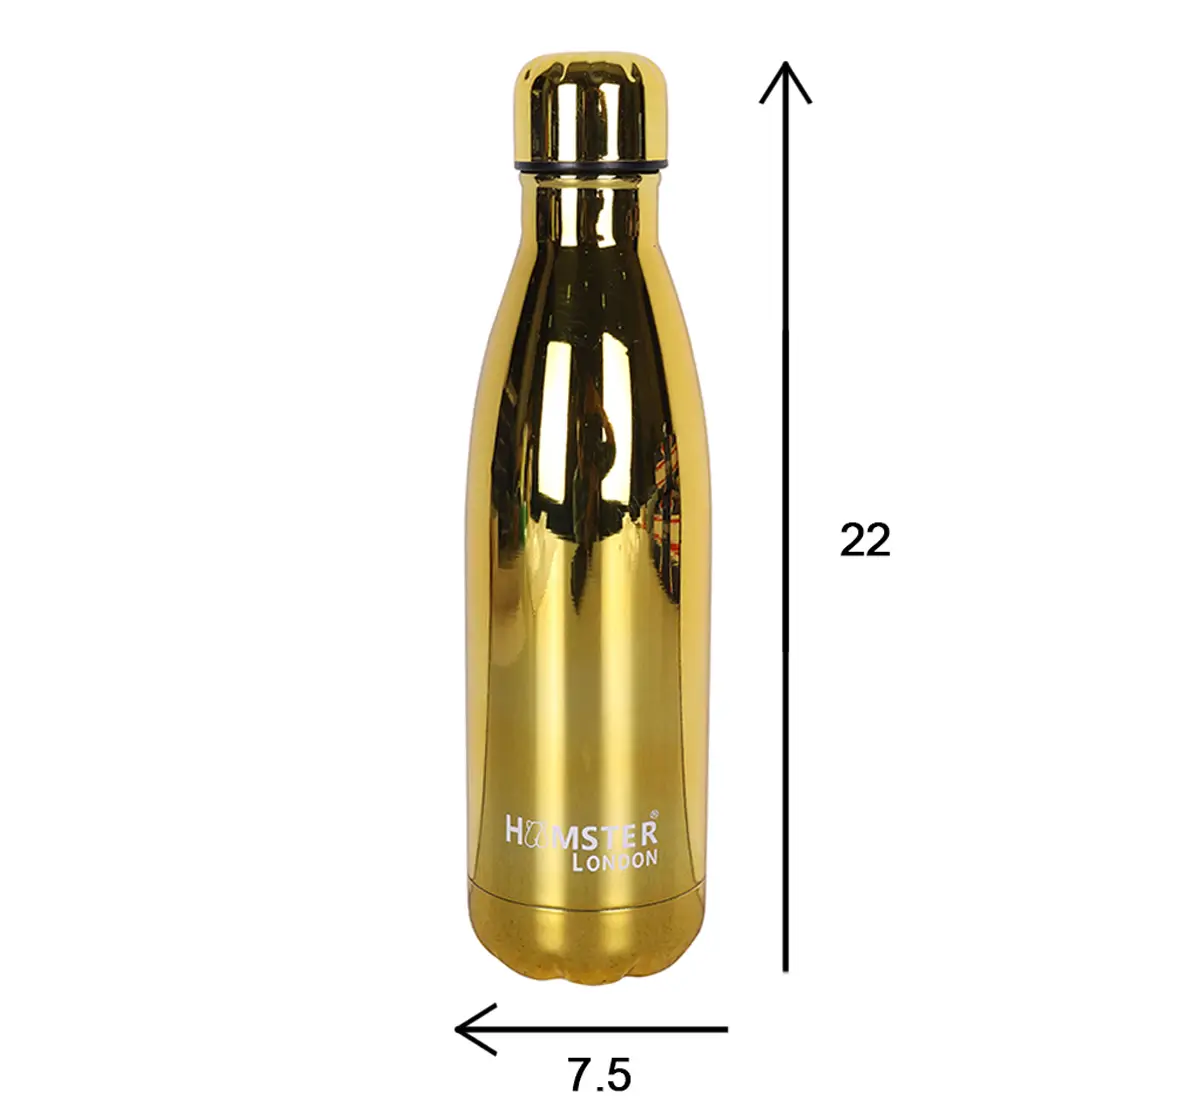 Stainless Steel Insulated Water Bottle by Hamster London for Kids, Gold, Non-Toxic, BPA Free, 500ml, 5Y+